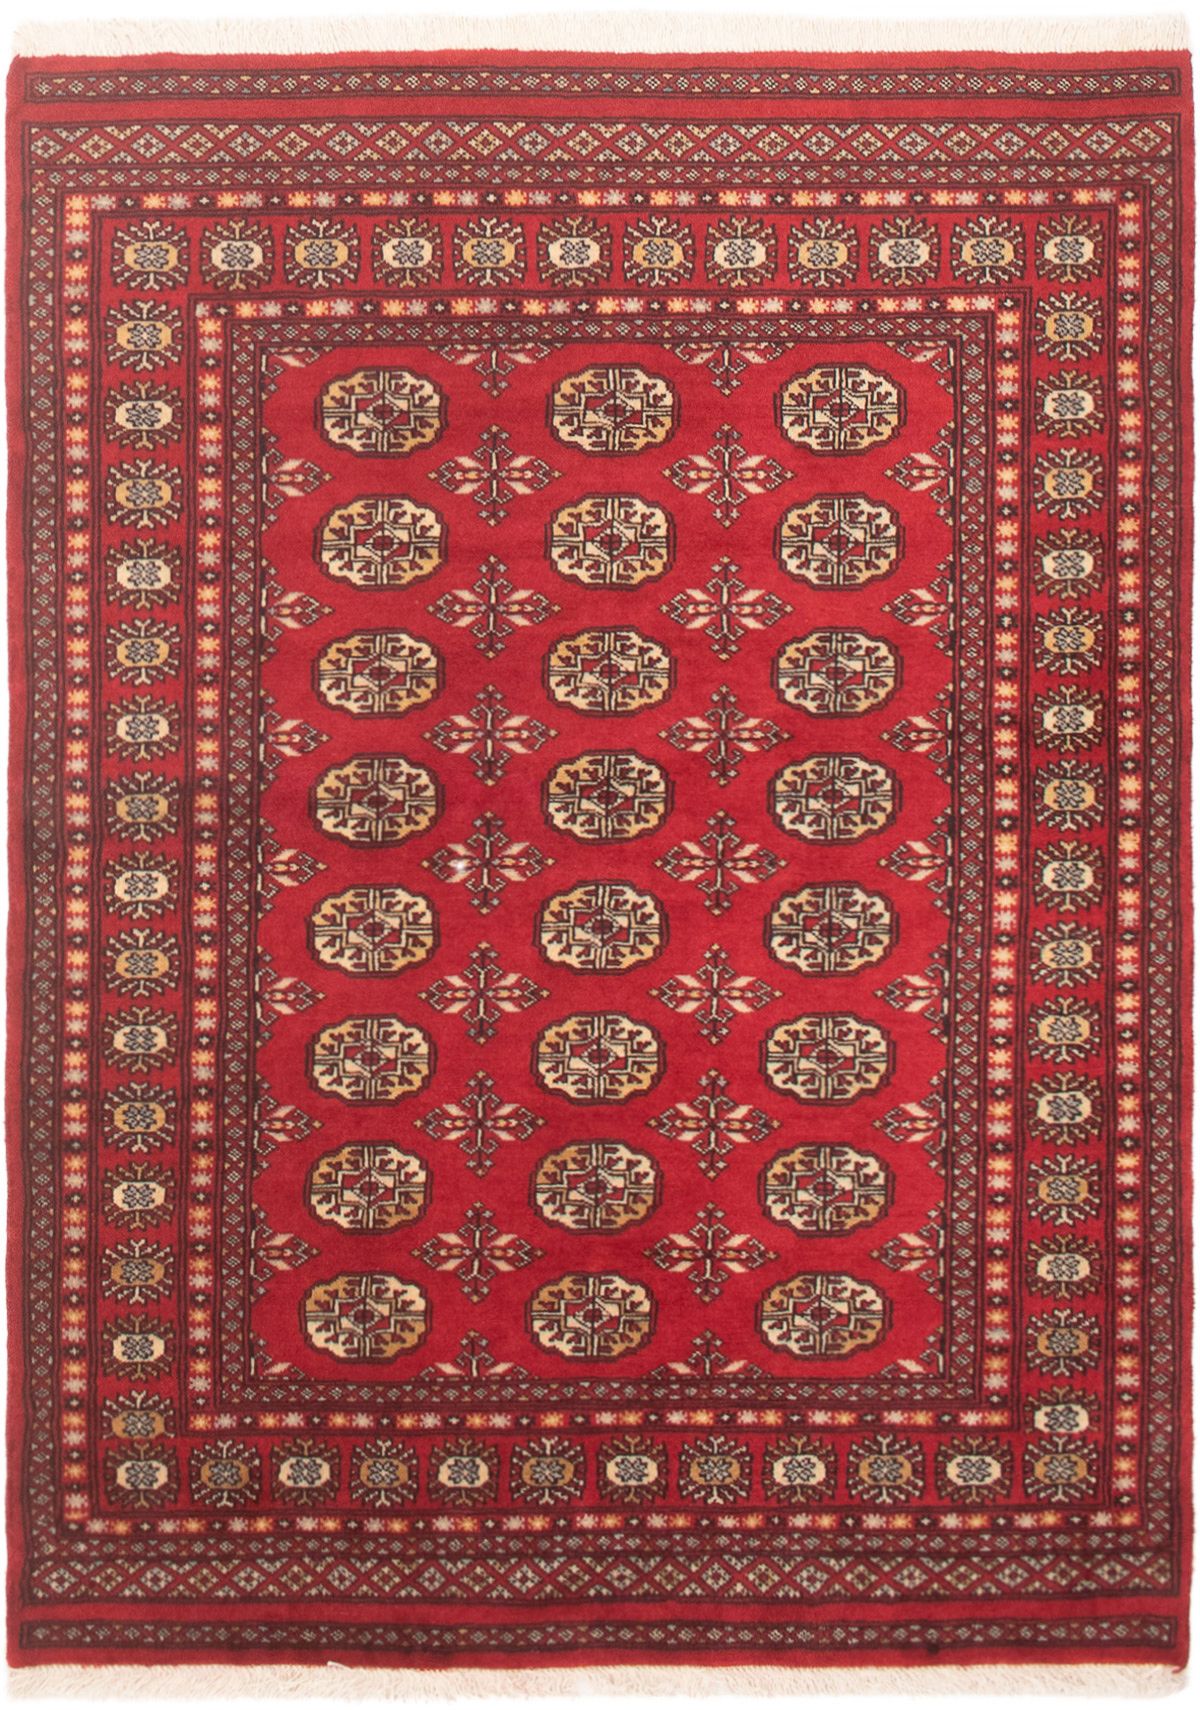 Hand-knotted Finest Peshawar Bokhara Red Wool Rug 4'0" x 5'6" Size: 4'0" x 5'6"  